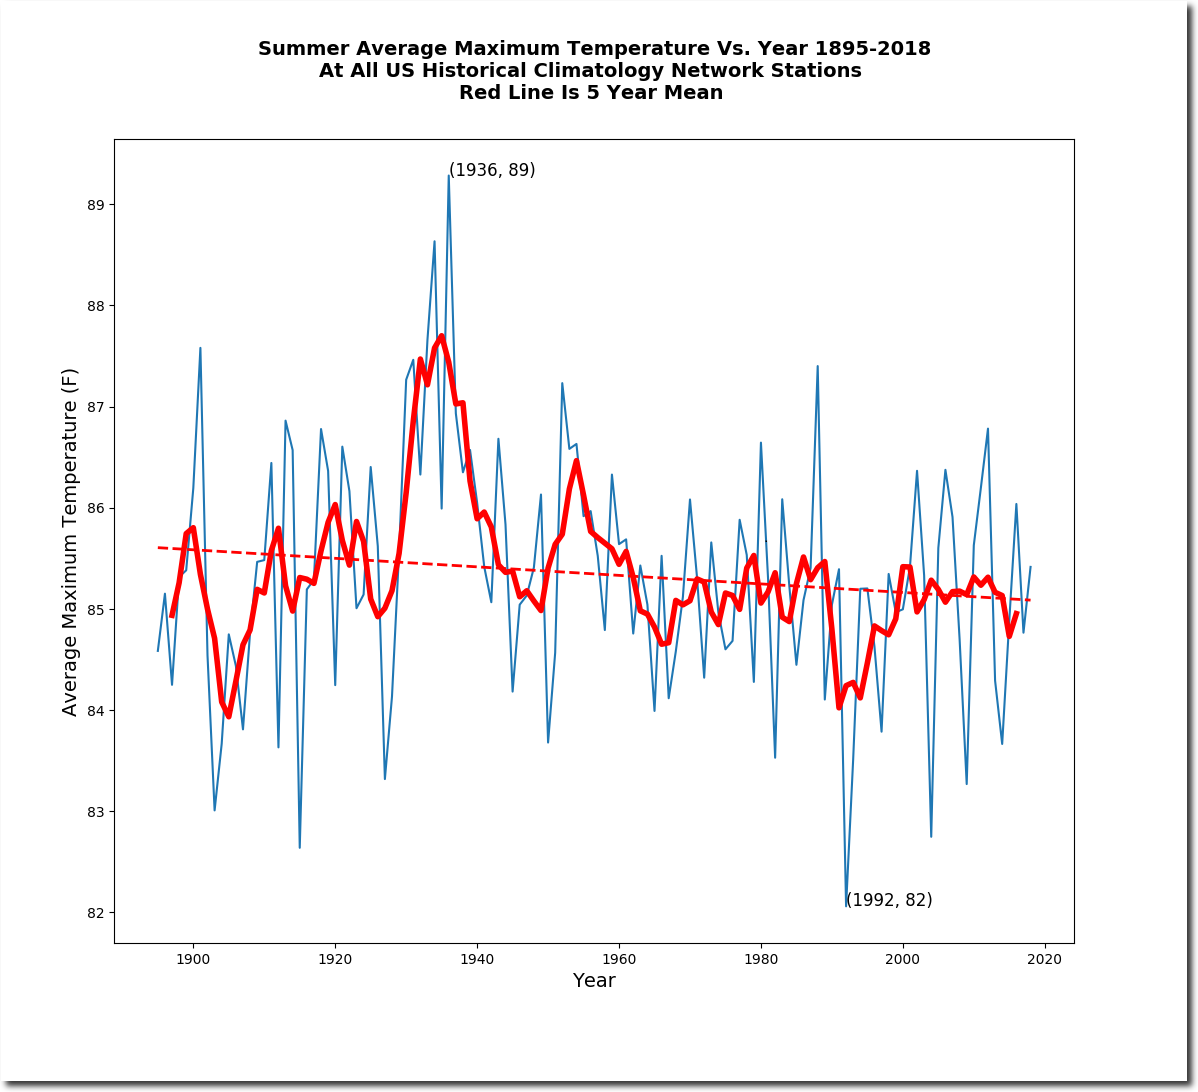 Summer-1895-2018-At-All-US-Historical-Climatology-Network-Stations-Red-Line-Is-5-Year-Mean-AverageMaximumTemperature-vs-Year_shadow.png